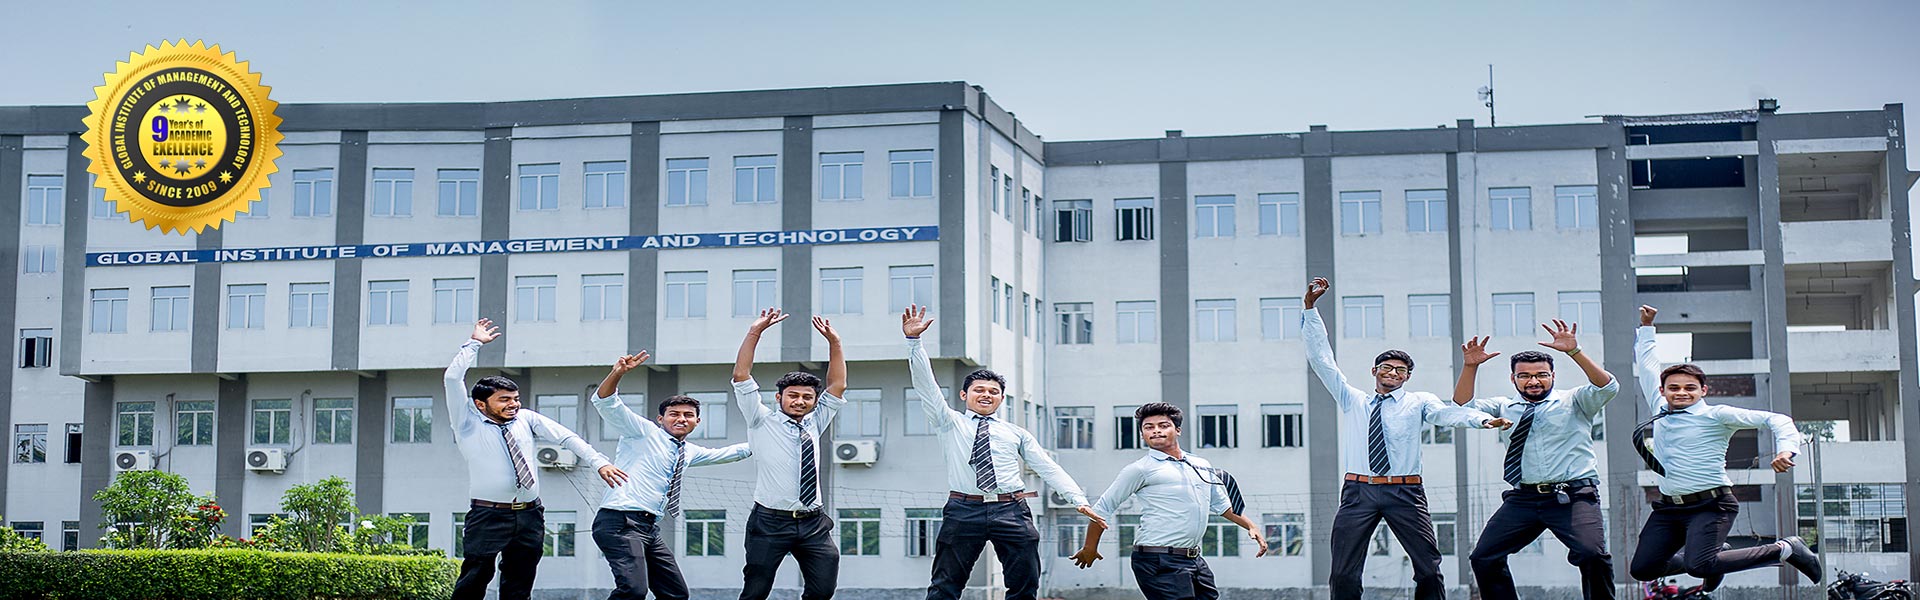 GLOBAL INSTITUTE OF MANAGEMENT AND TECHNOLOGY Image